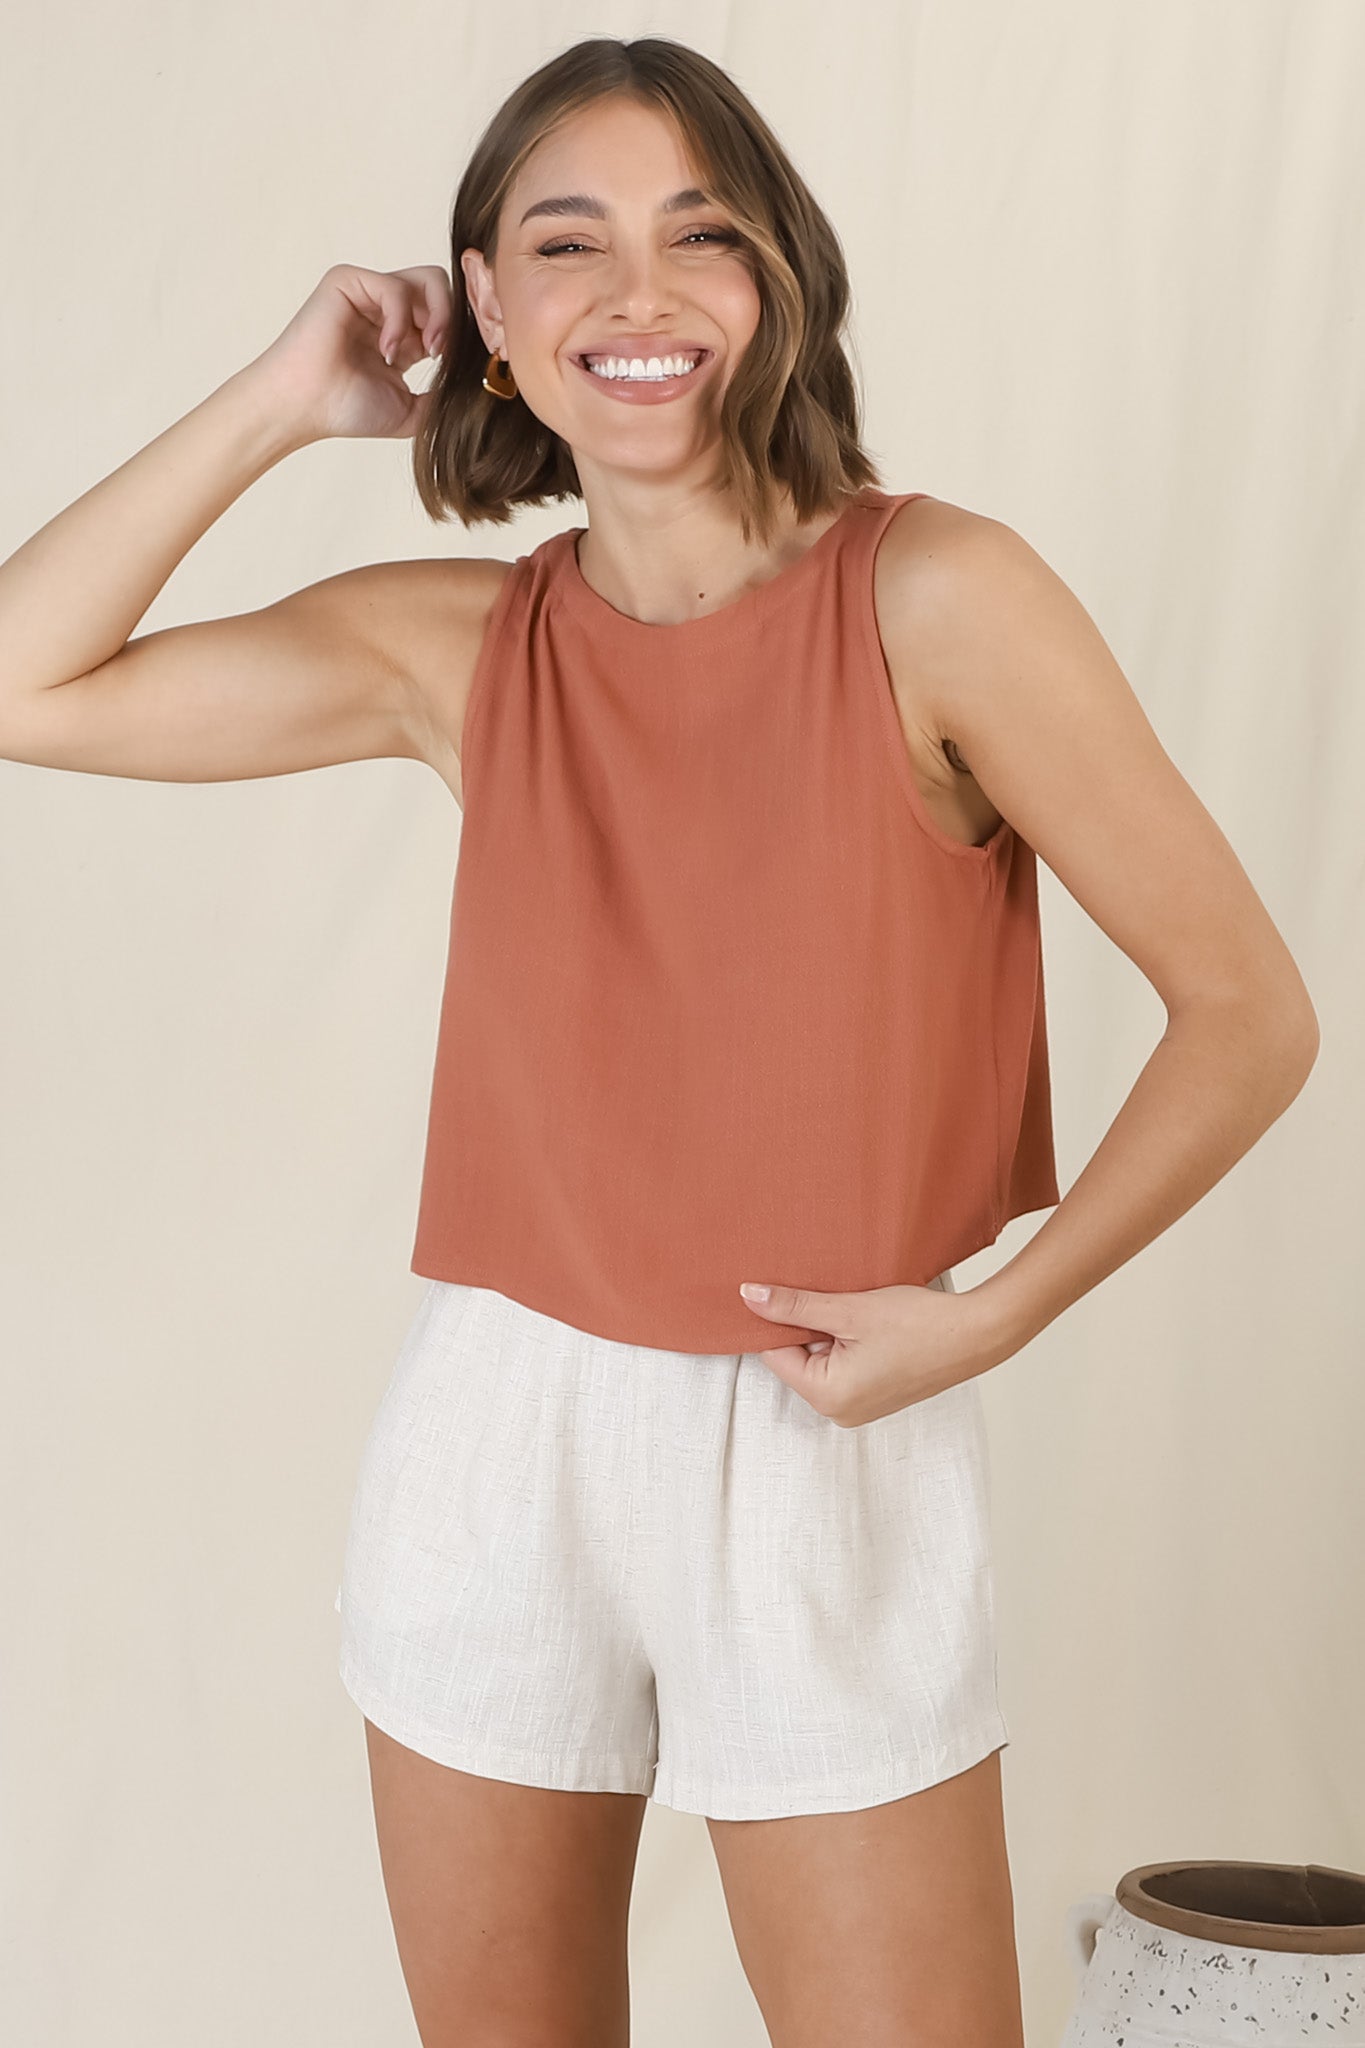 Kaydee Top - Boxy Sleeveless Top with Button Down Spine in Rust